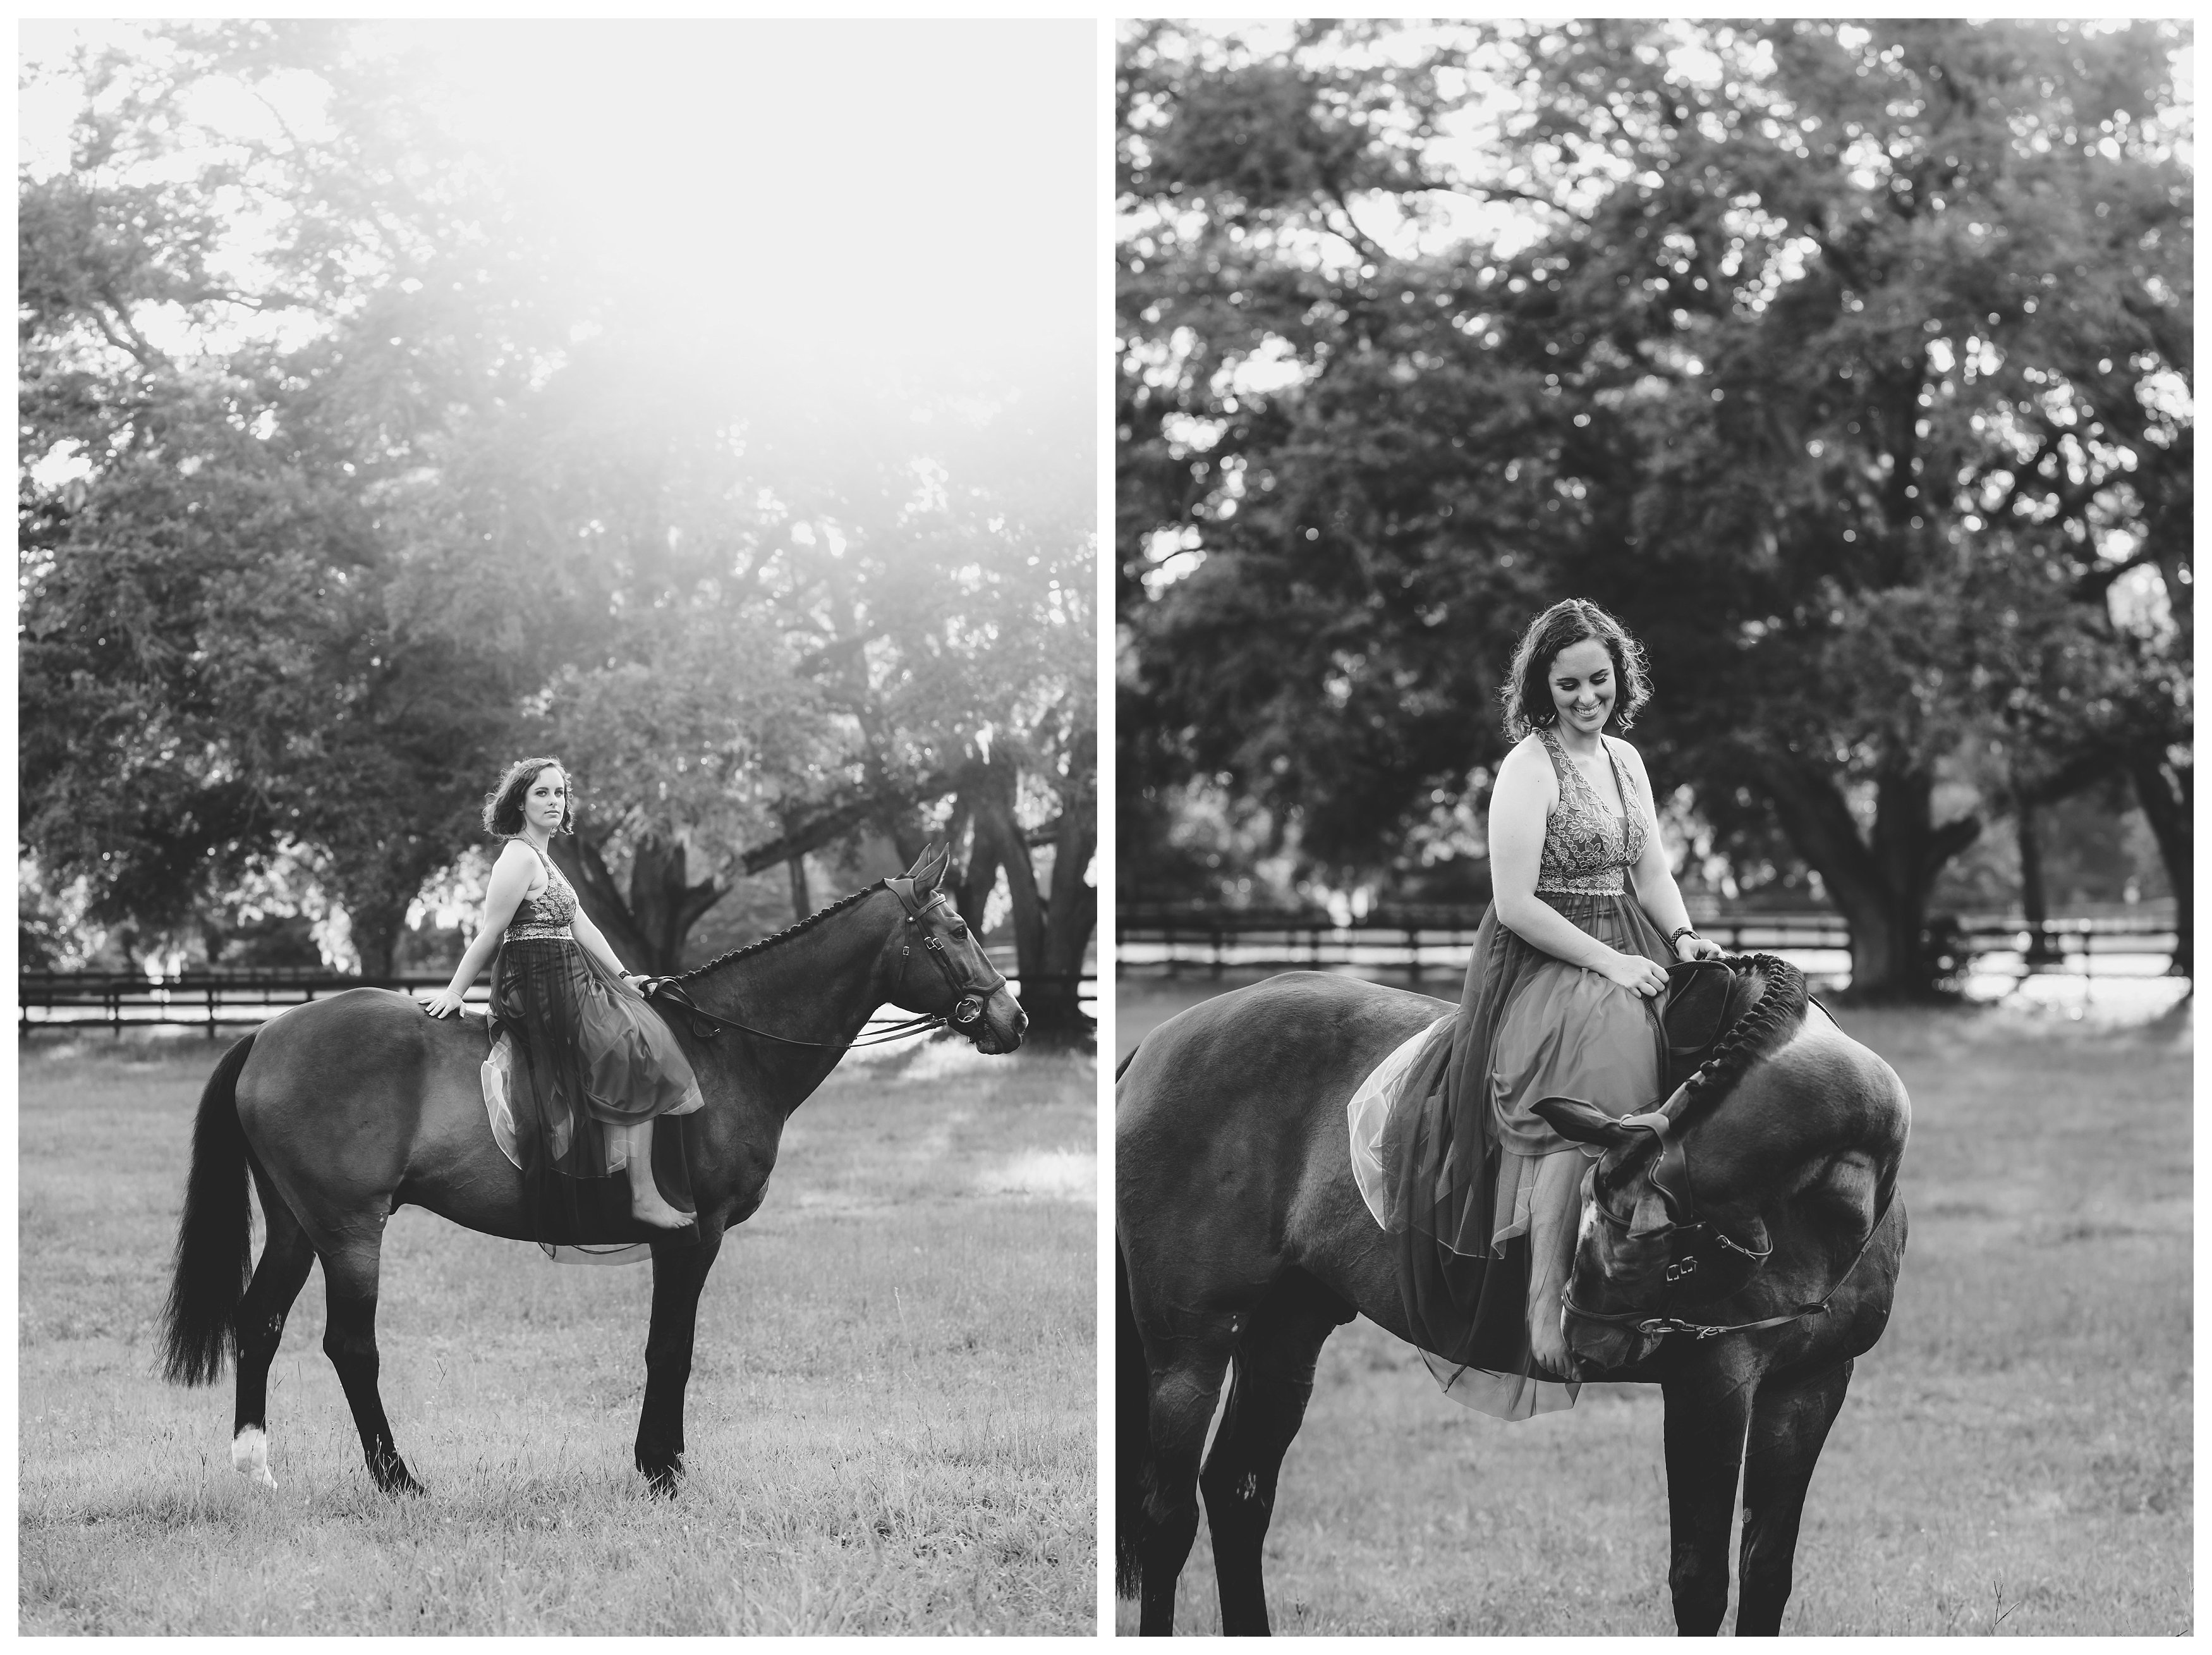 Black and white photos of girl riding her horse in a long formal dress.